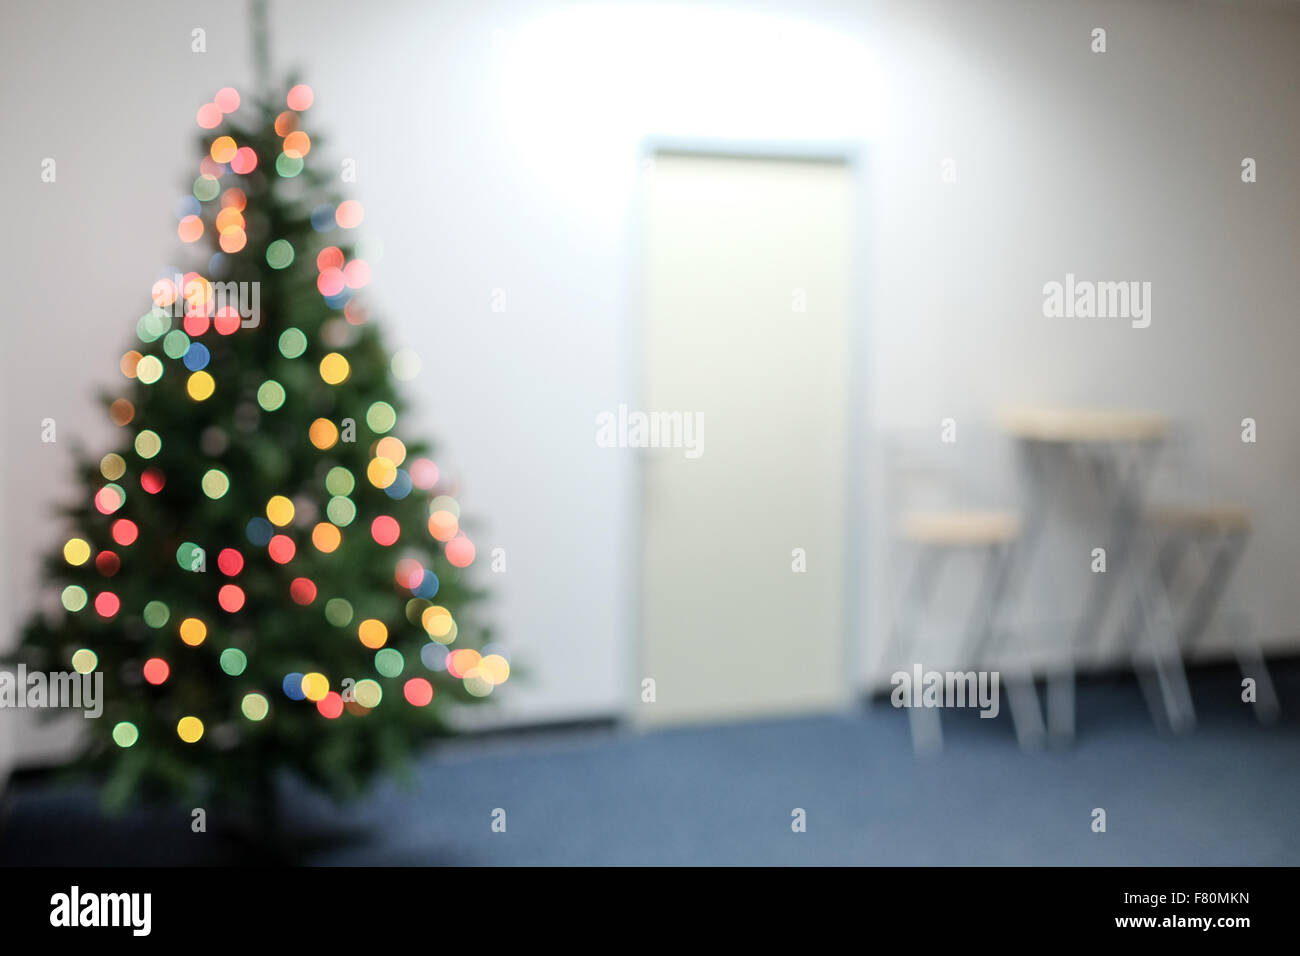 Blurred background image of an office decorated with bokeh of christmas tree, to be used for background purpose Stock Photo